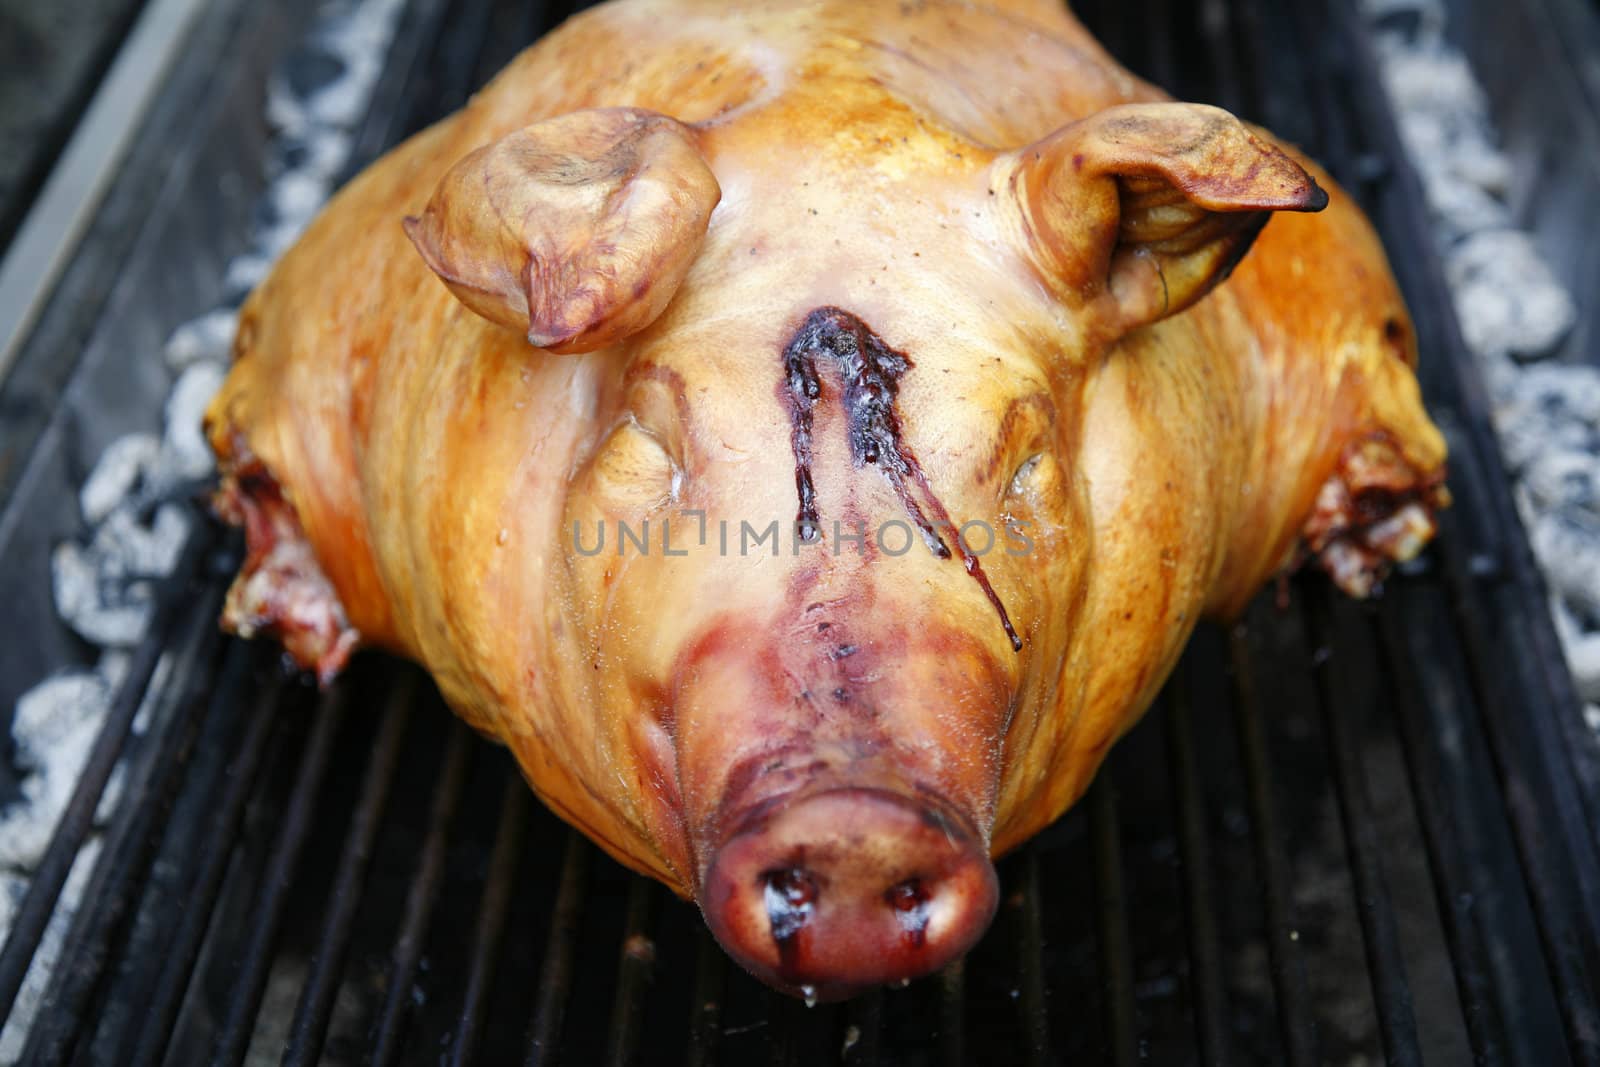 Barbeque pig by ABCDK